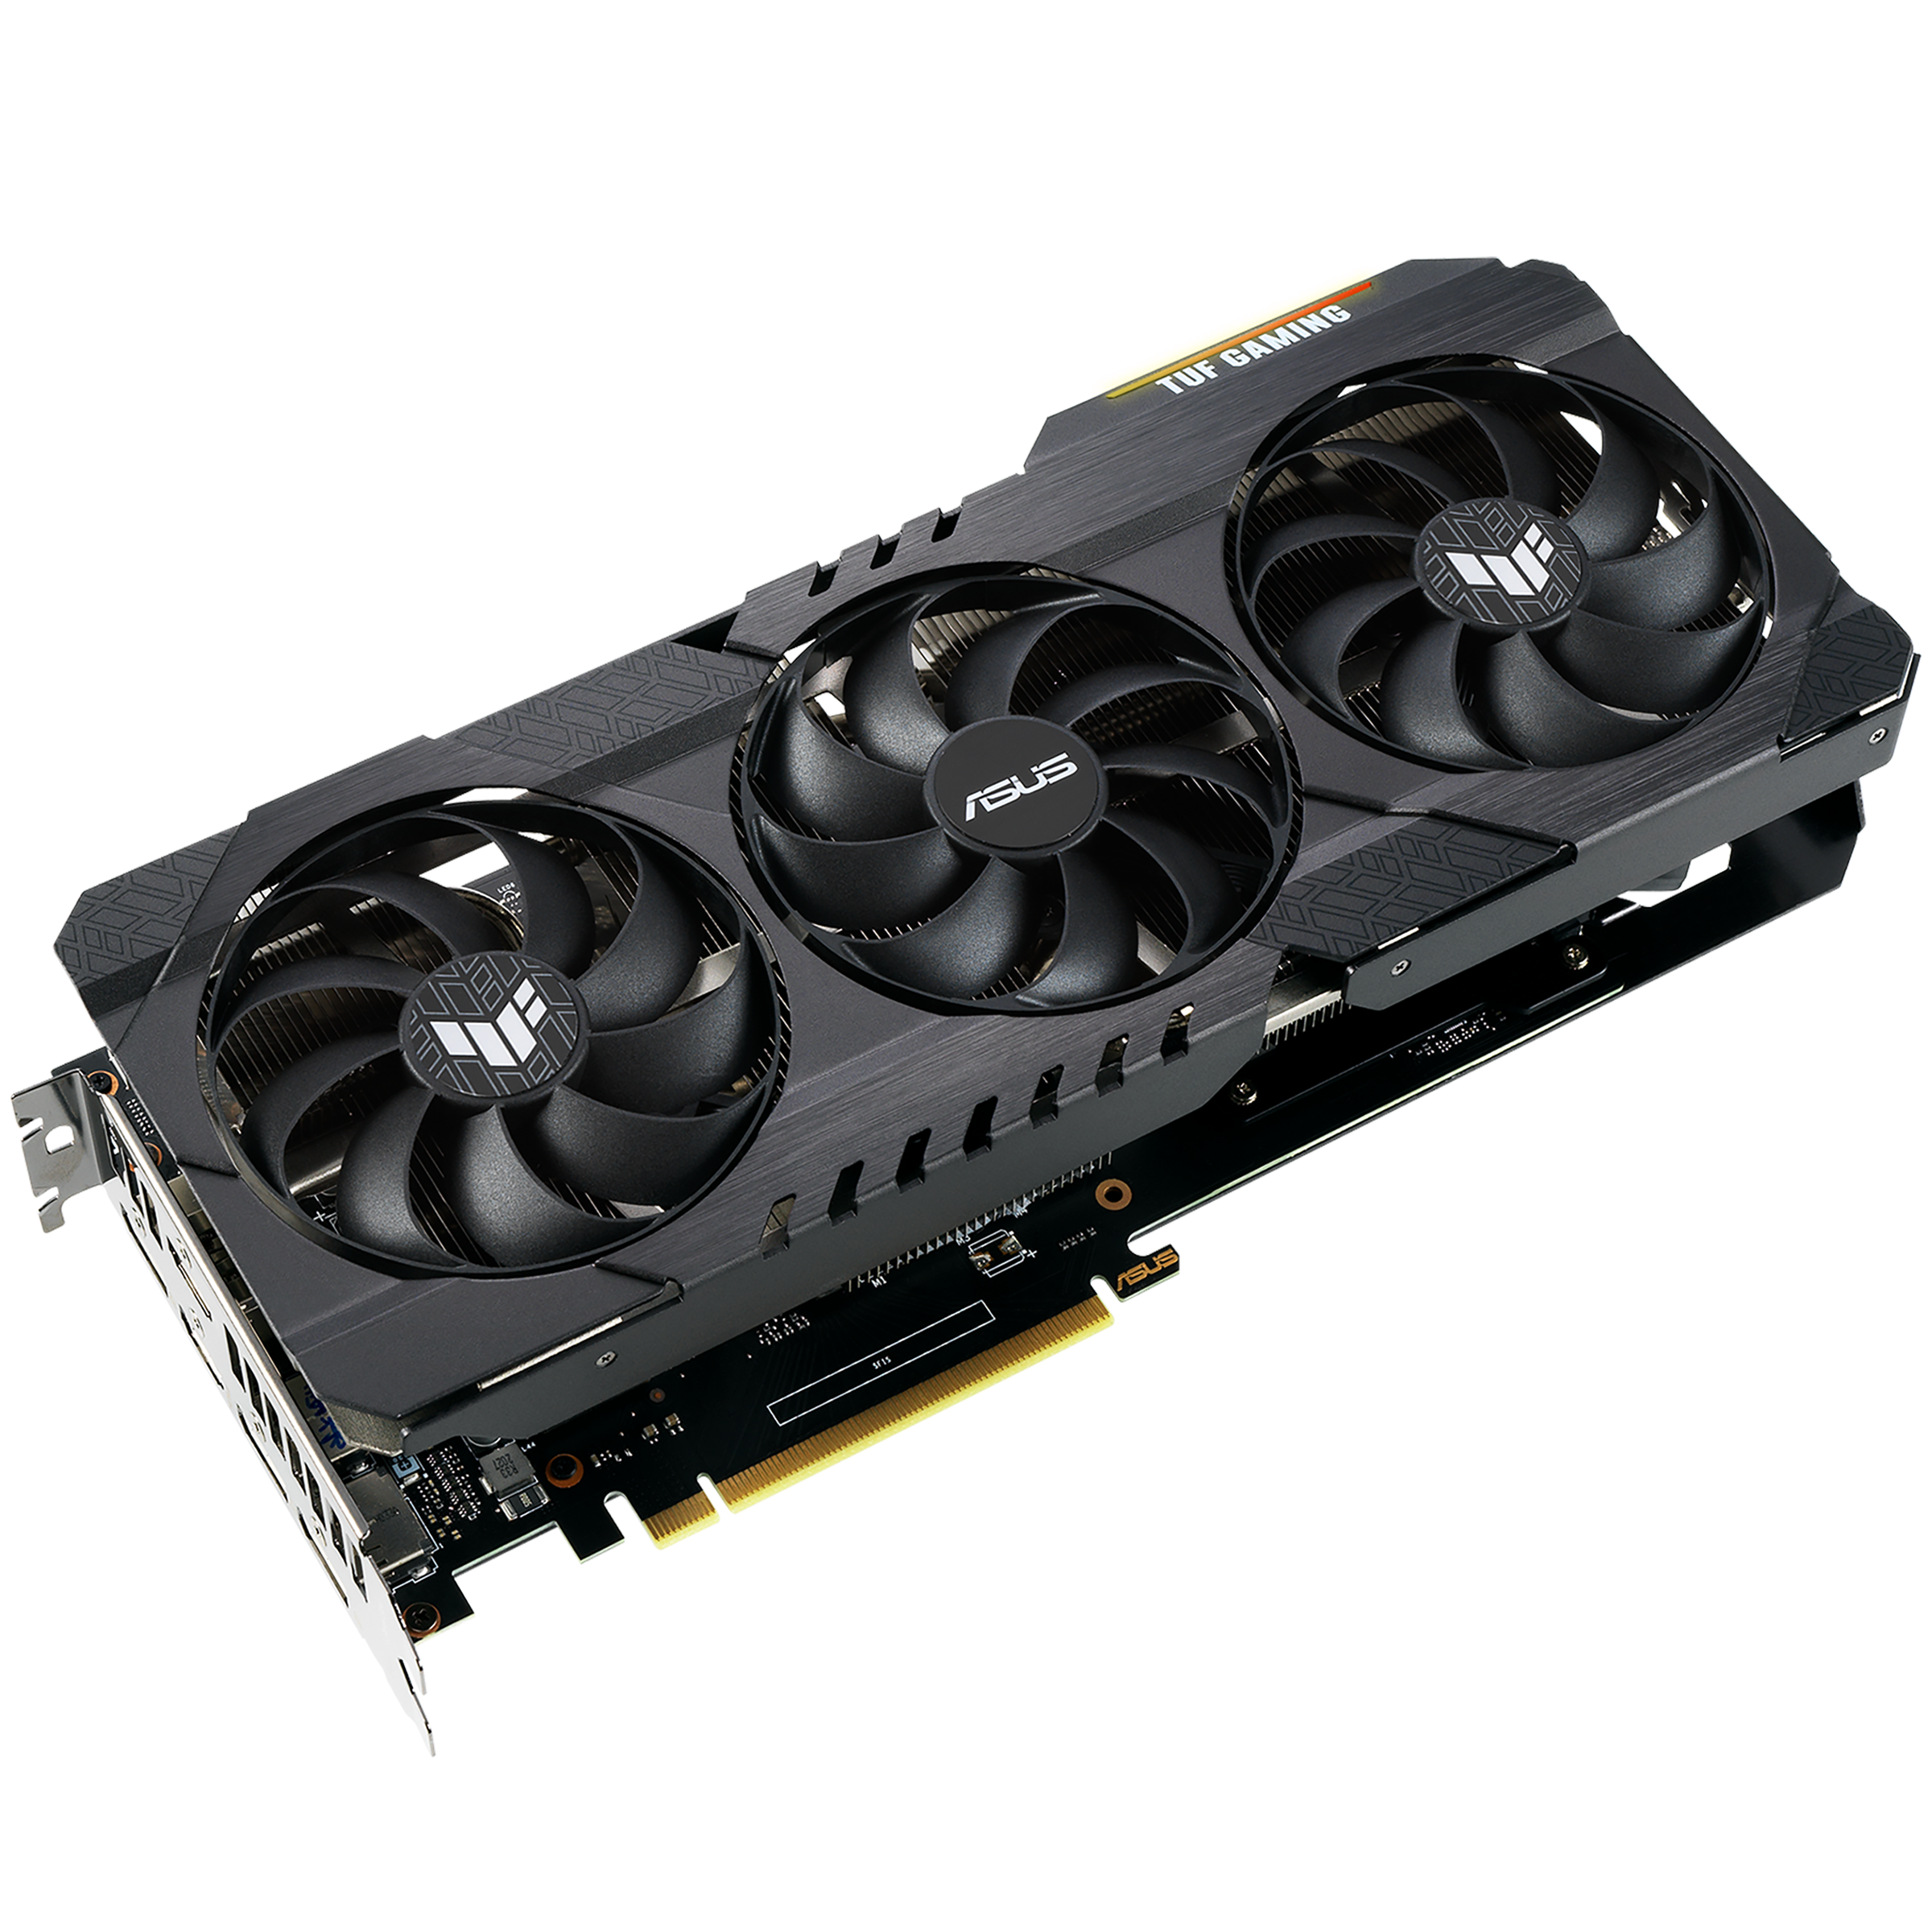 TUF-RTX3060-12G-V2-GAMING｜Graphics Cards｜ASUS Philippines